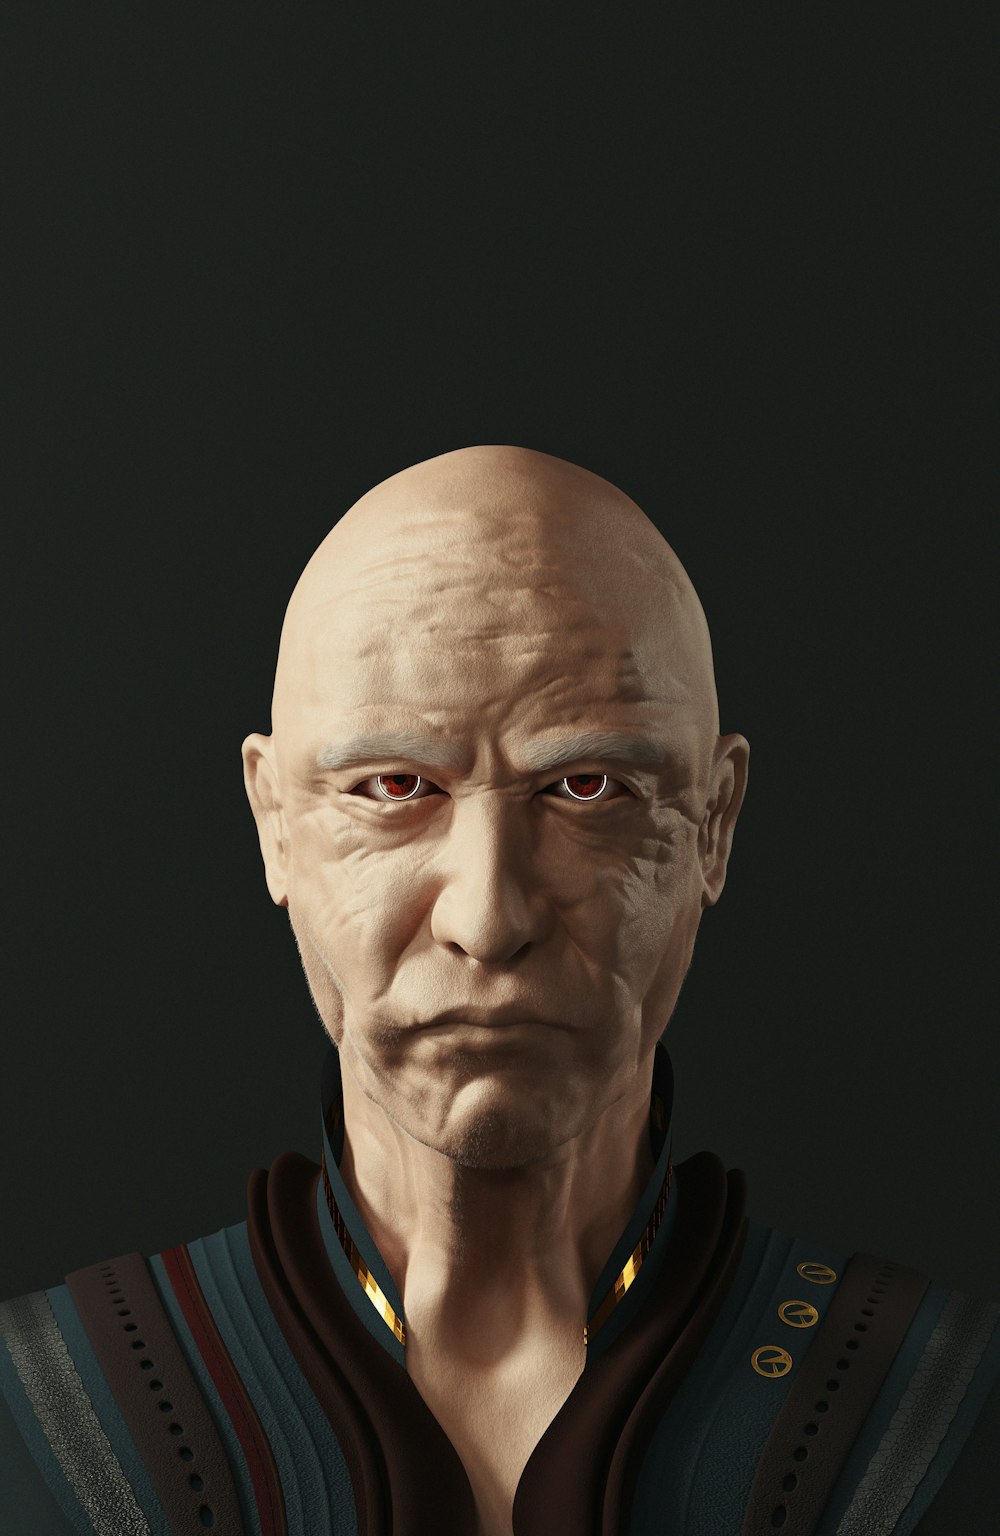 a bald man with a serious expression